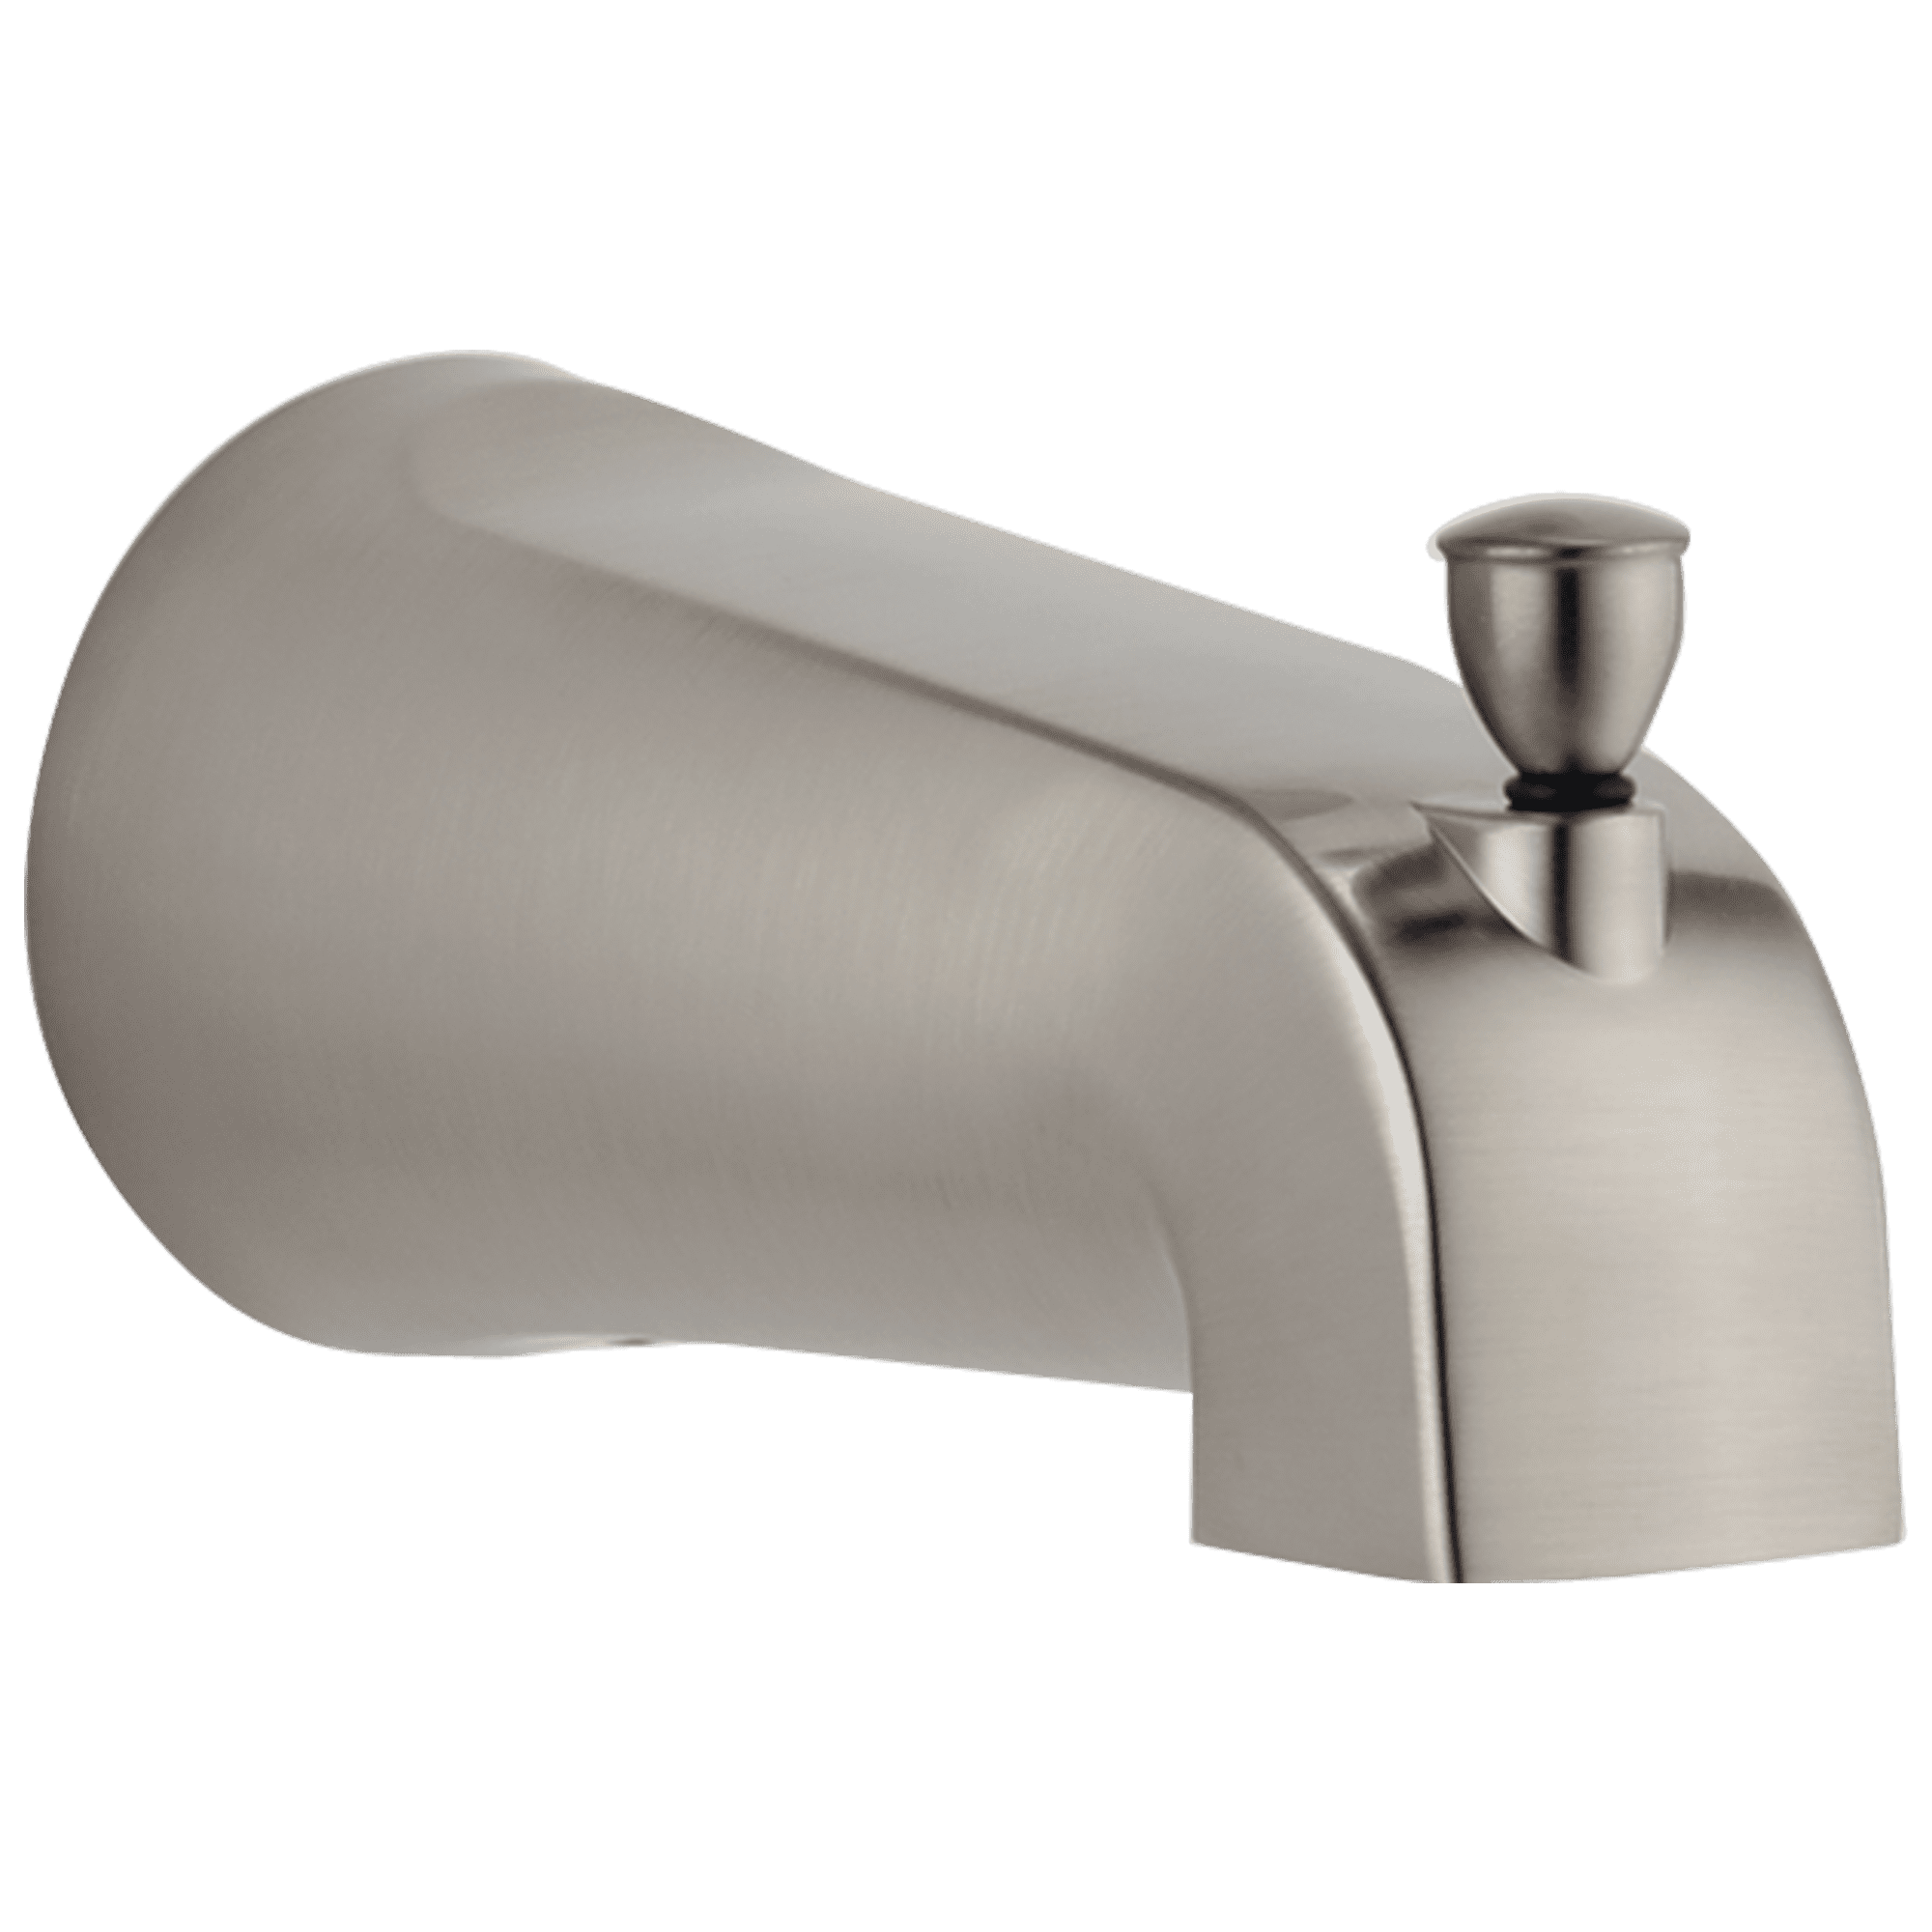 With Diverter Moen 3808WR 5 3/4" Tub Spout with 1/2" Slip Fit Connection 